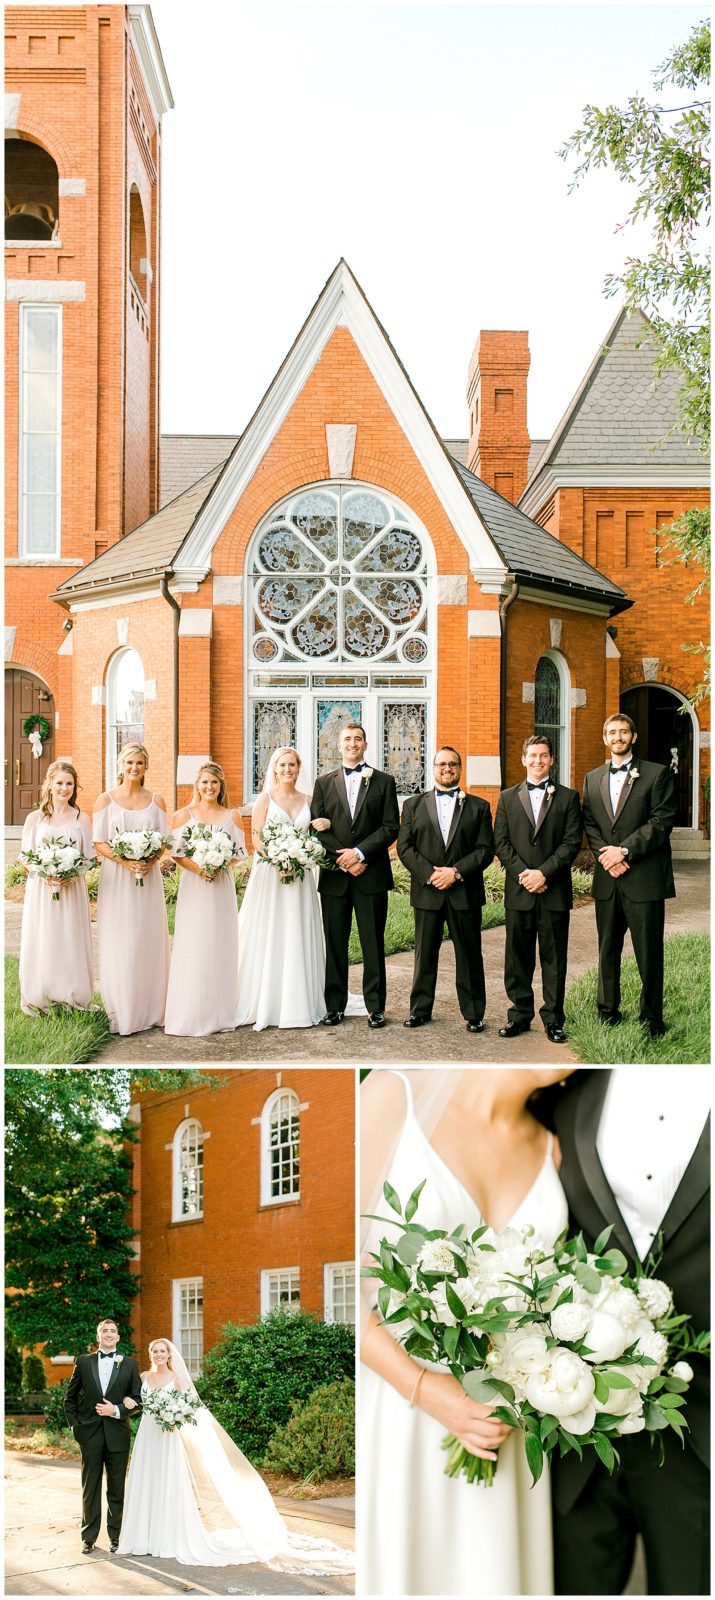 Bridal party and wedding couple